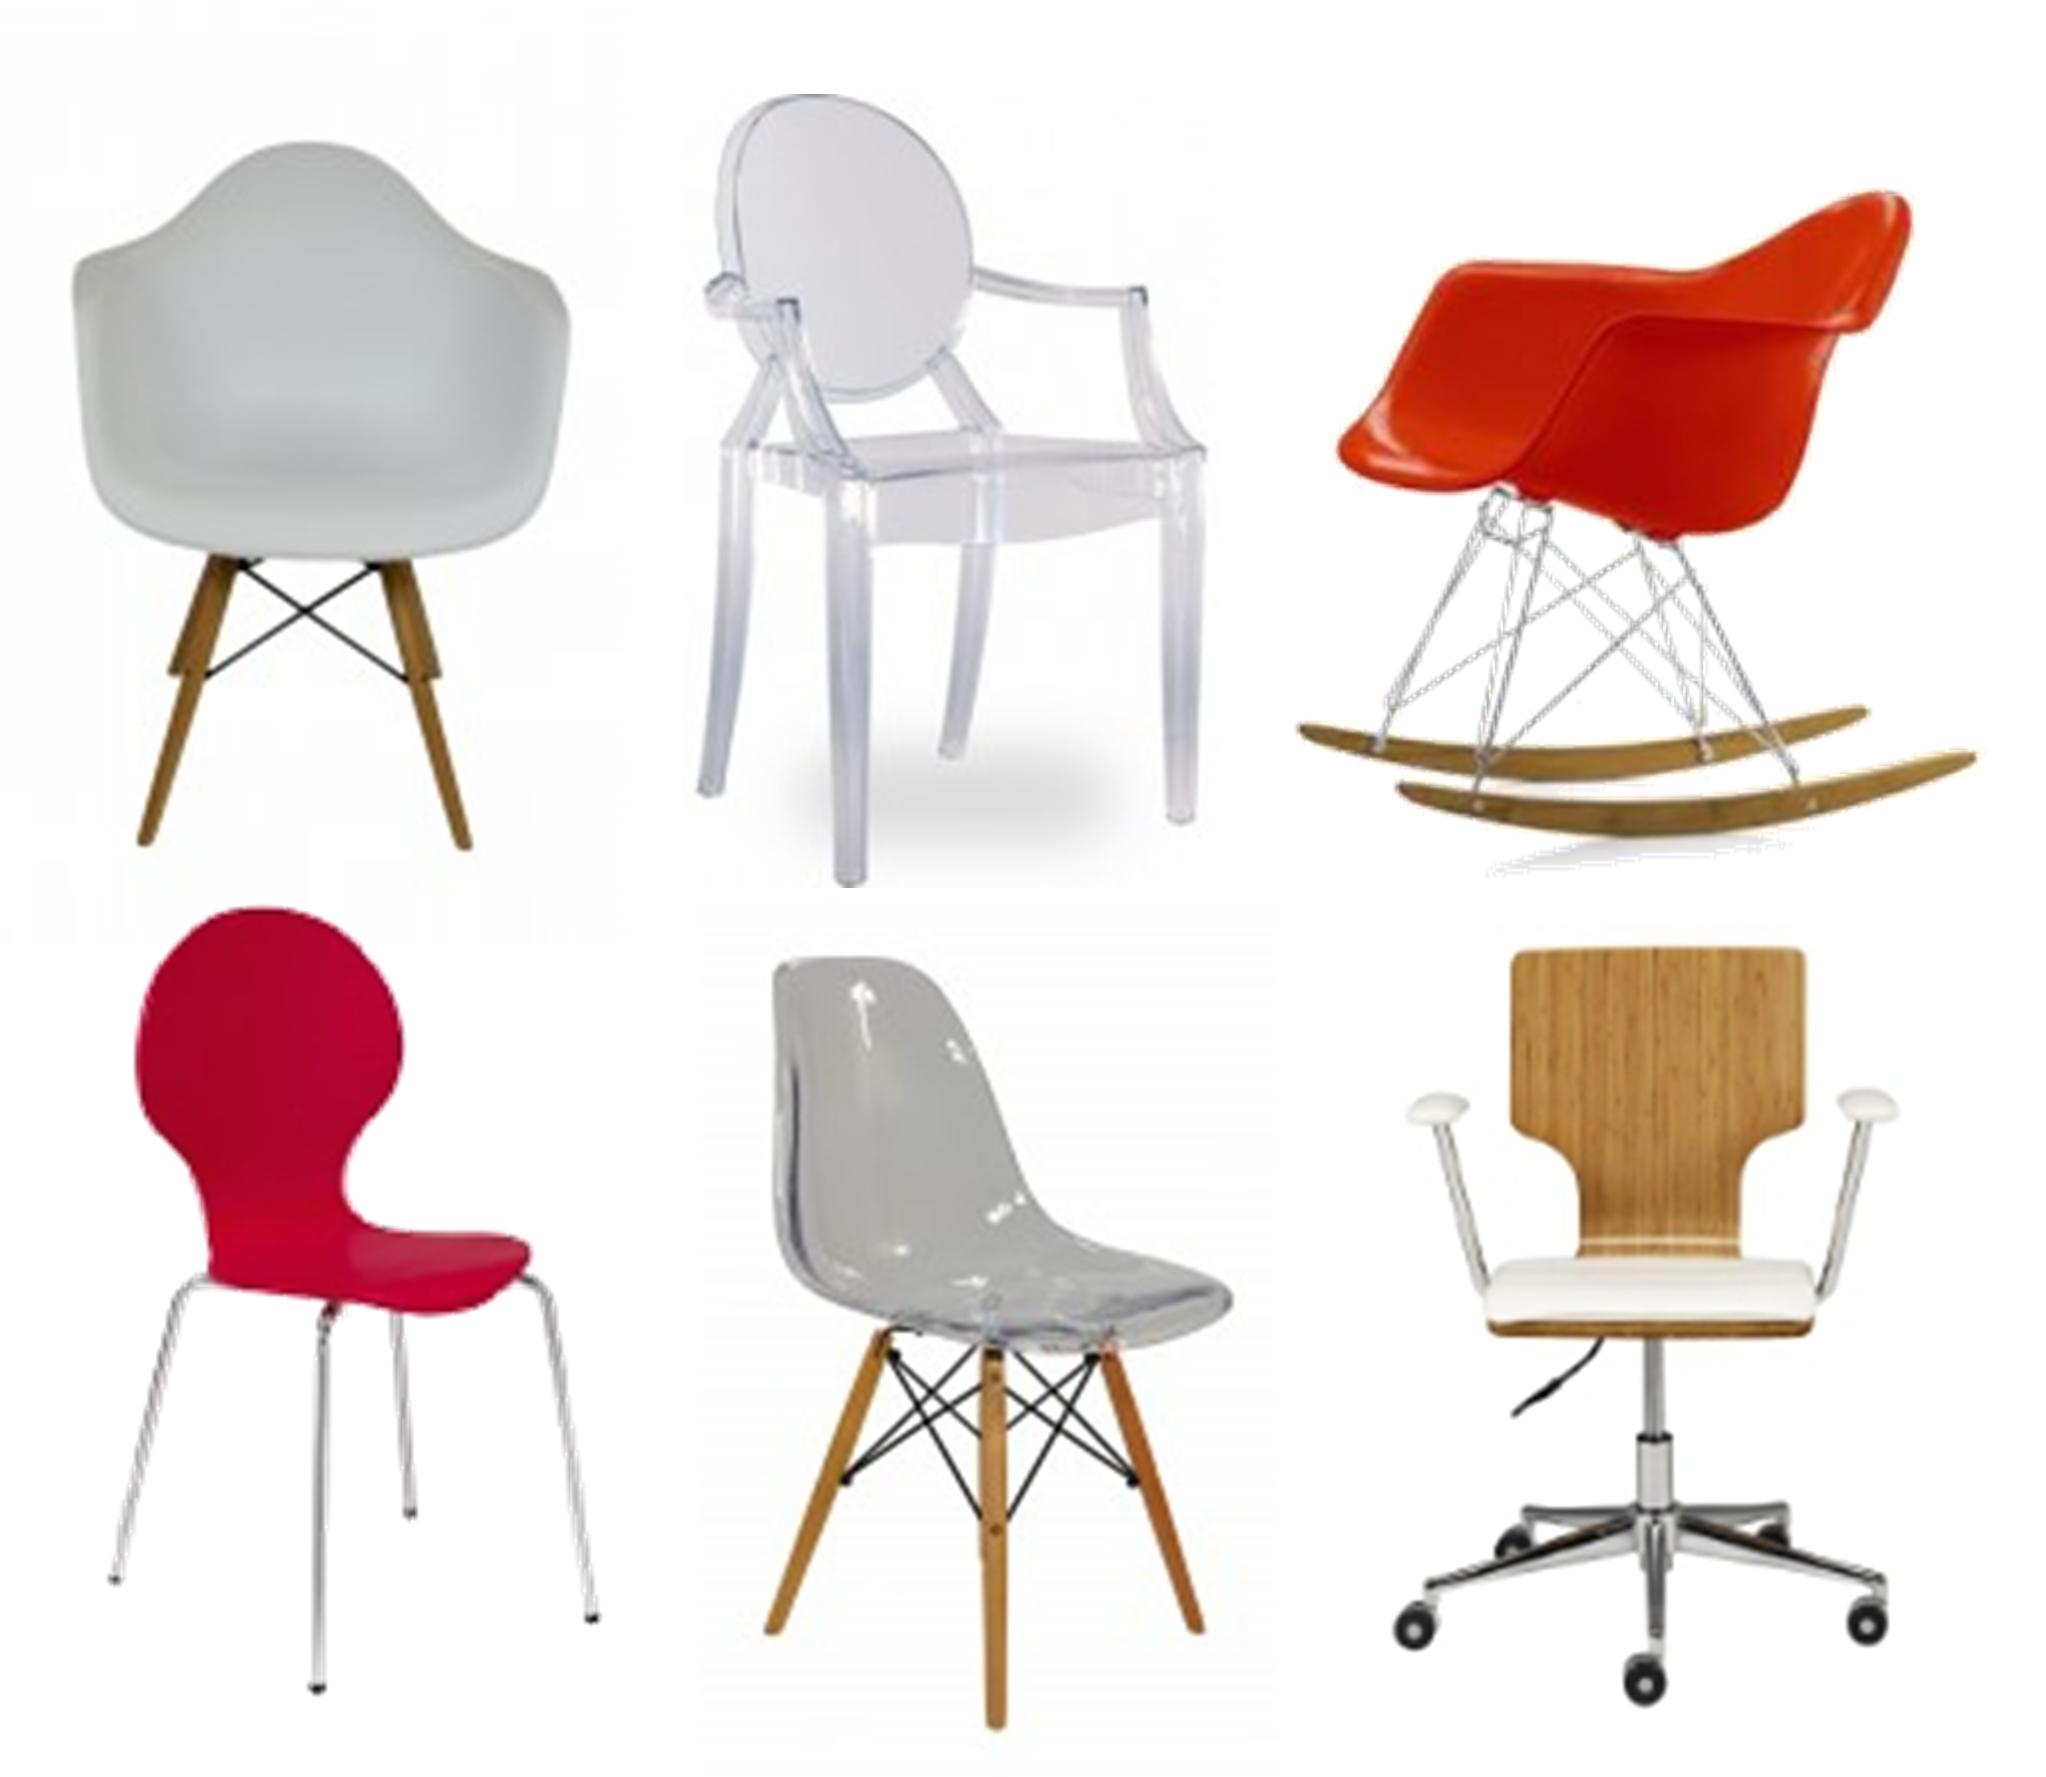 charles eames replica chairs and louis ghost chair lakeland furniture marks and spencer